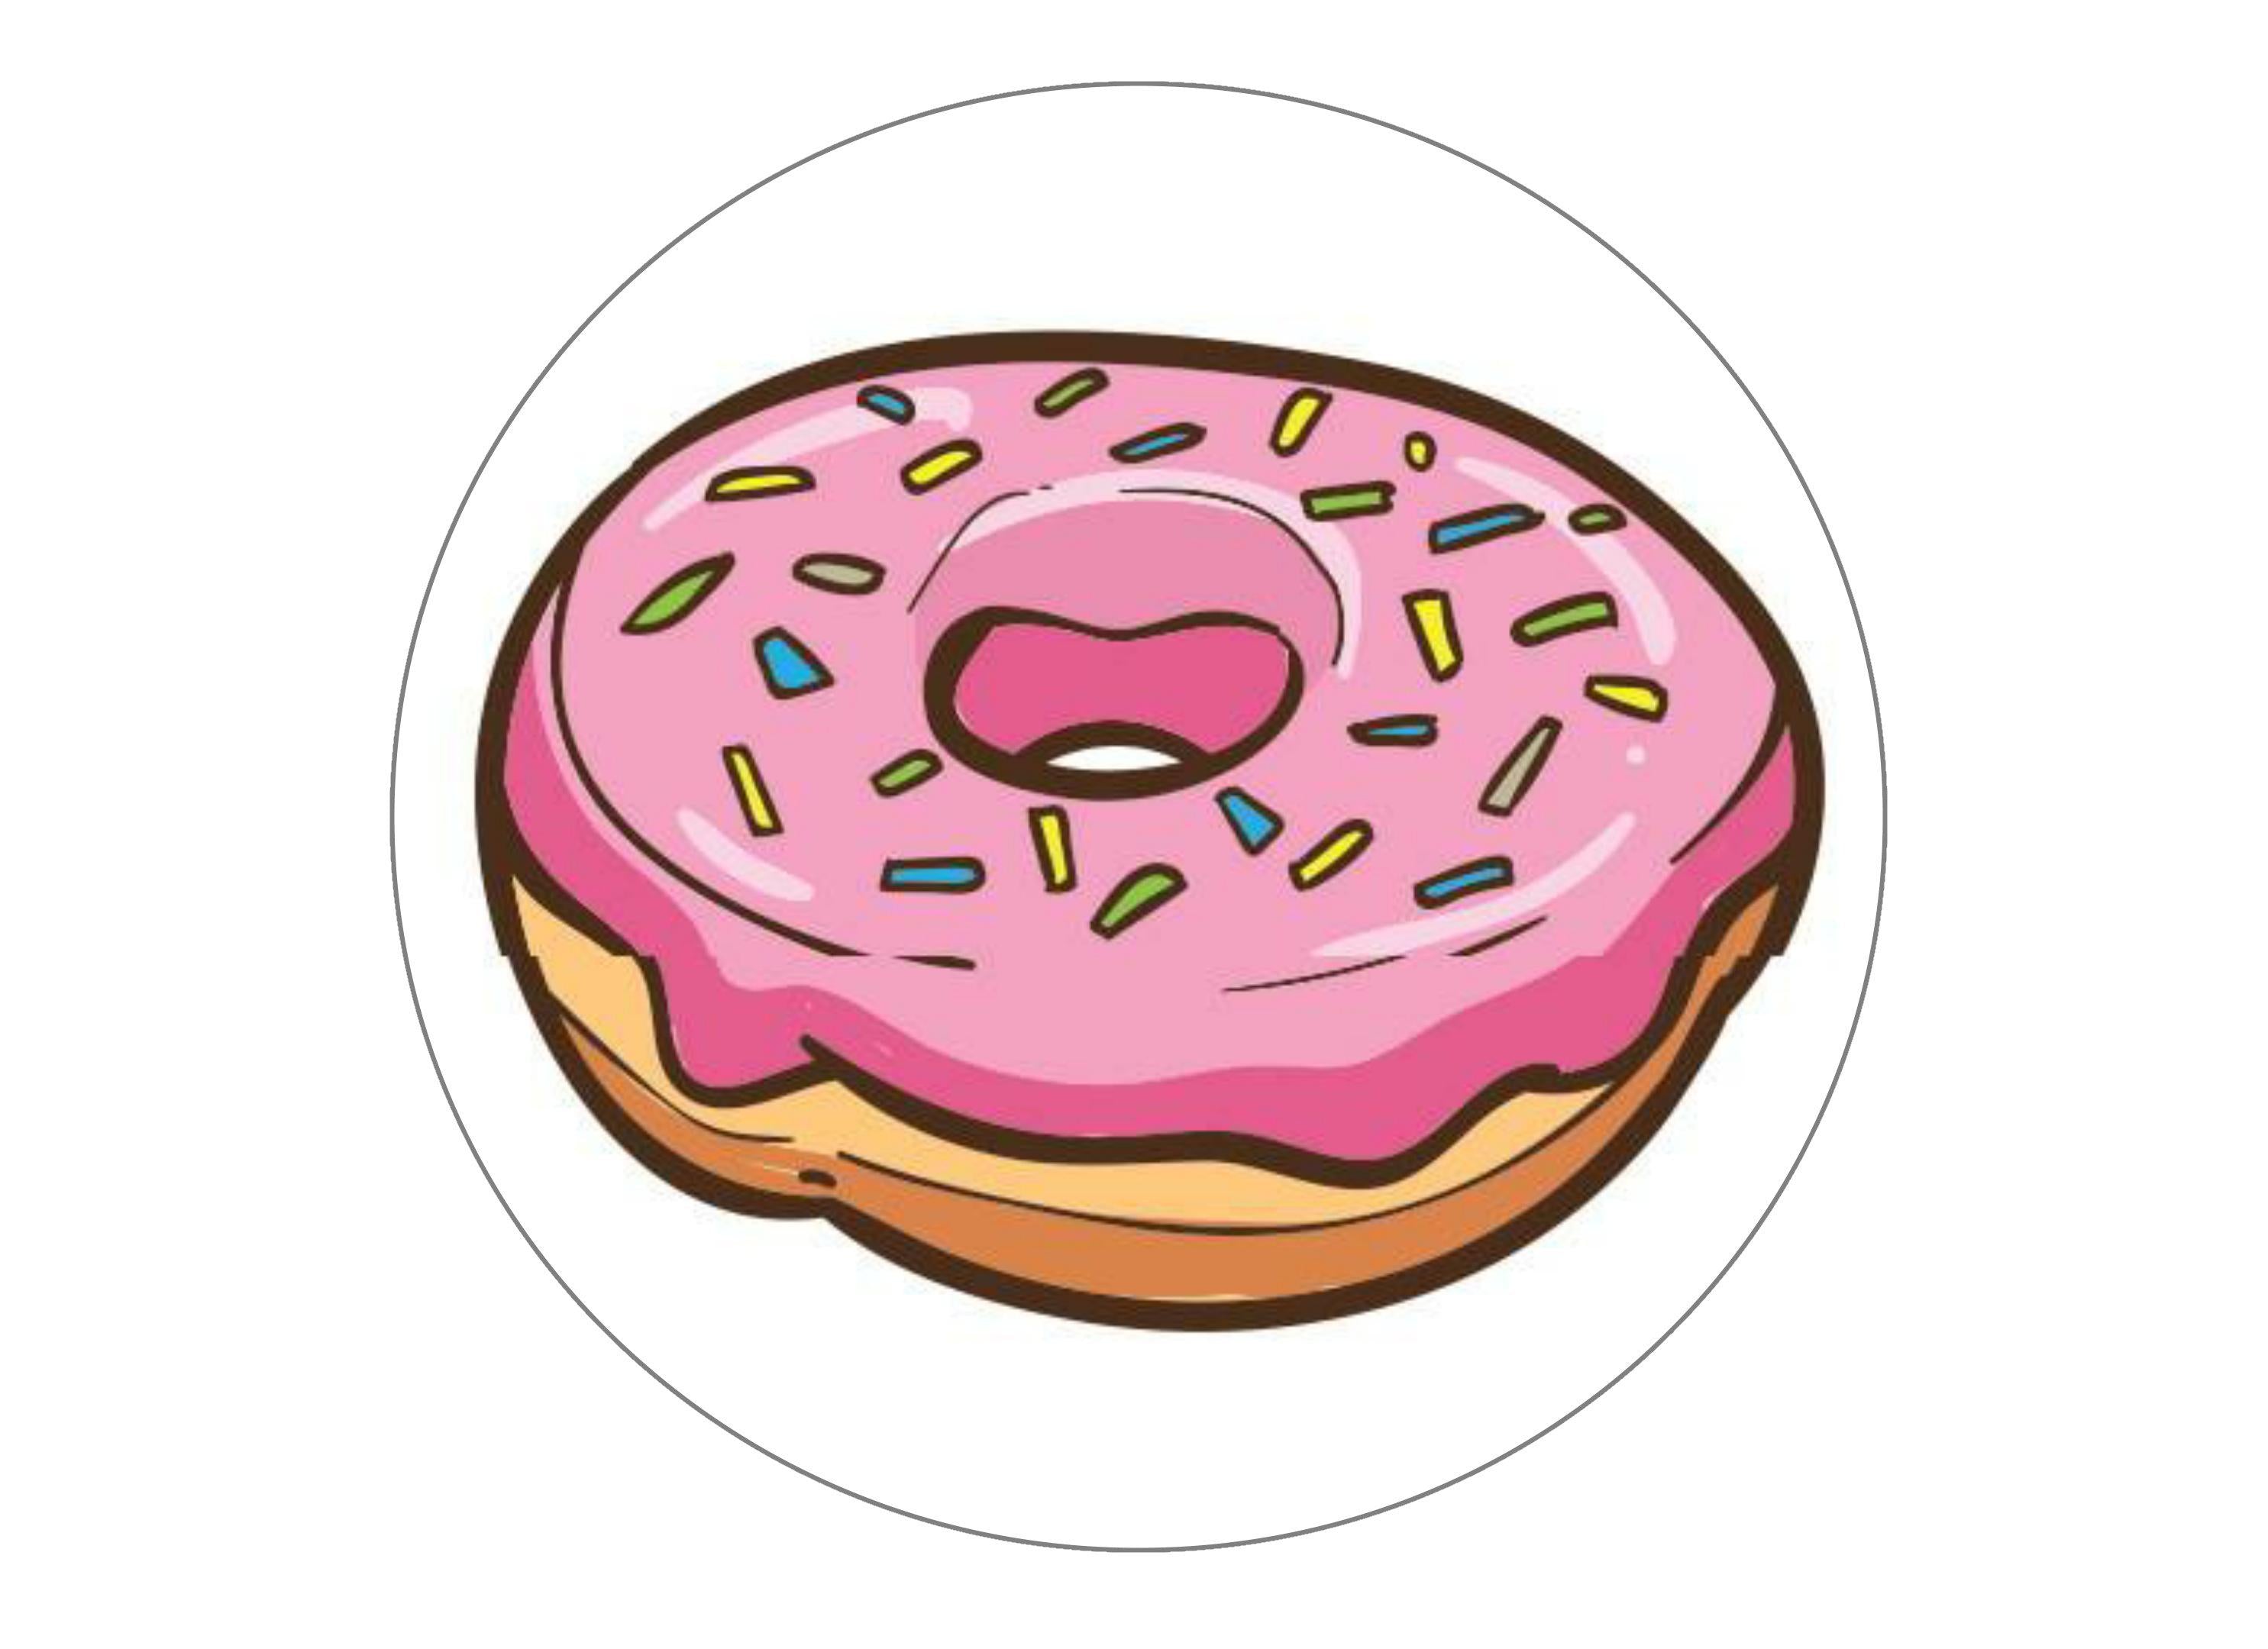 Large 7.5" cake topper with a pink doughnut image